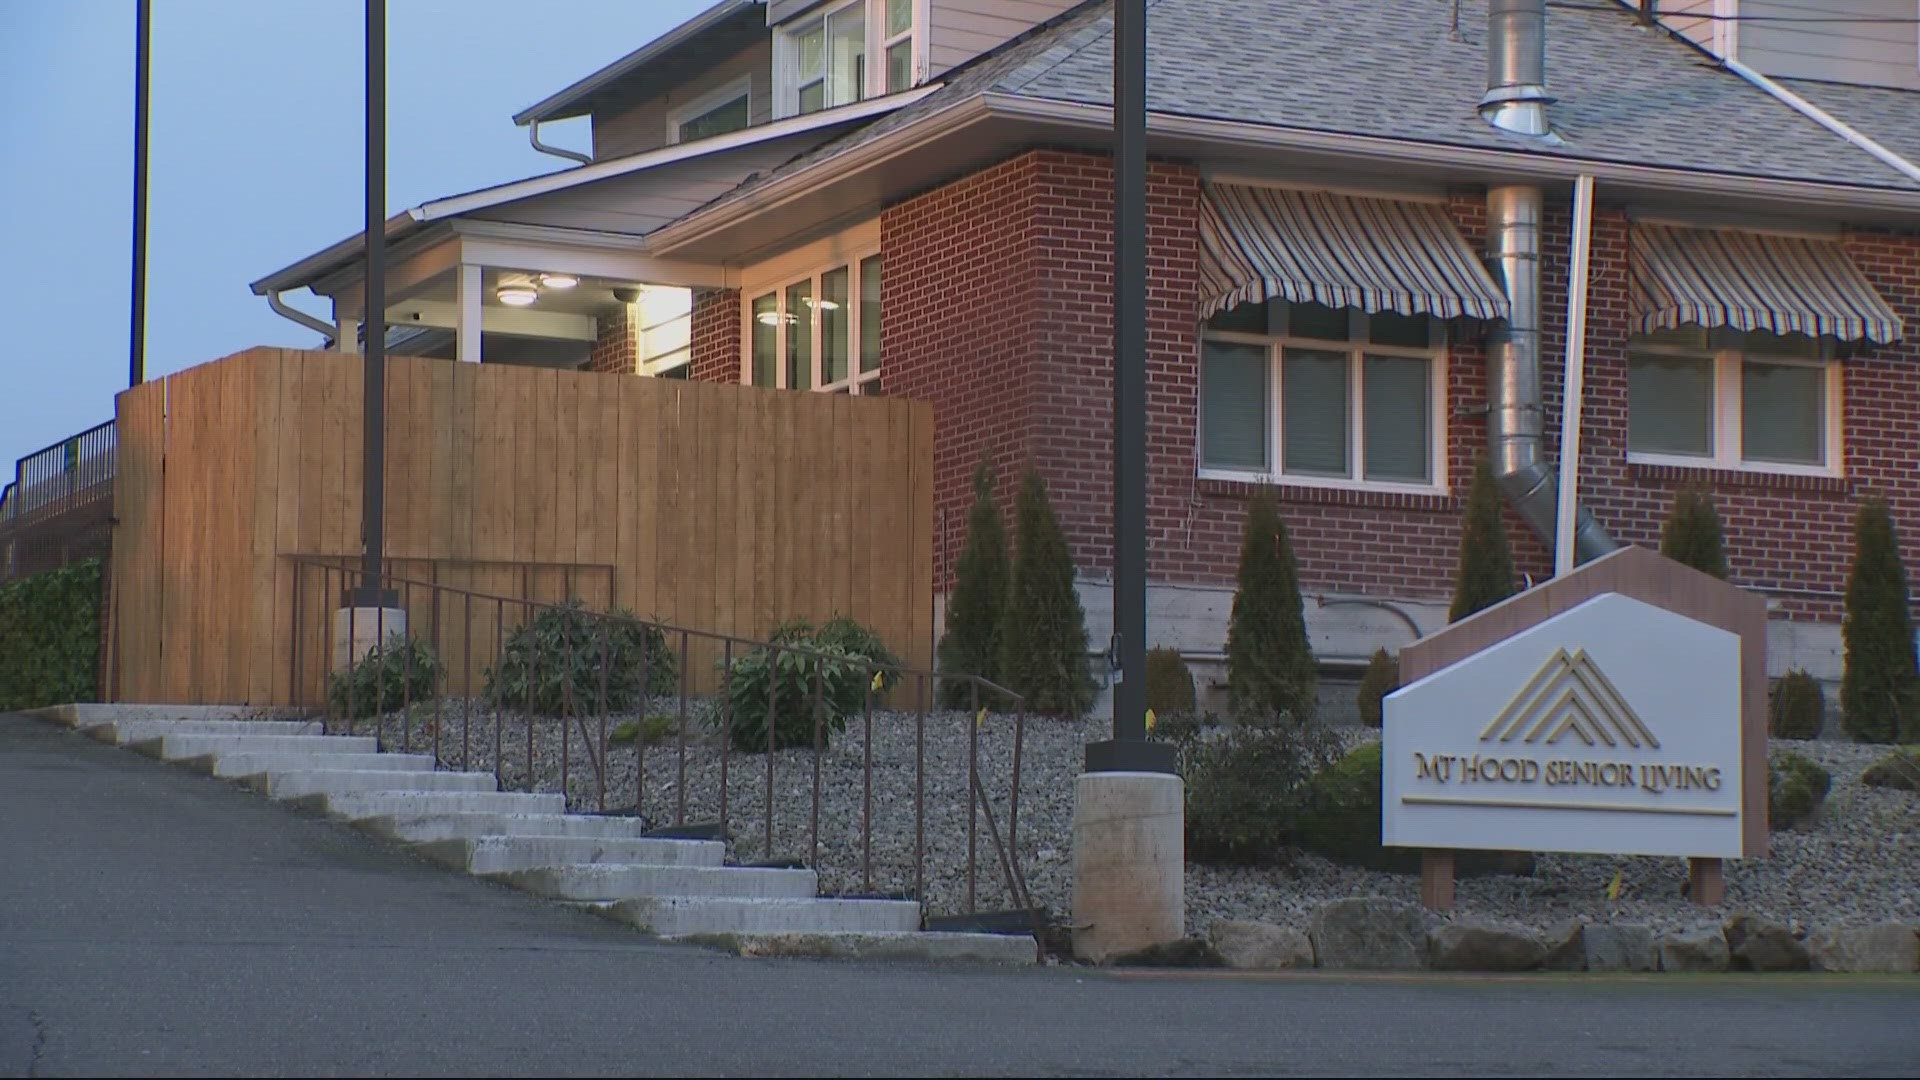 Mt. Hood Senior Living was shut down after the death of a resident, who was found a half-mile away on Christmas Day.